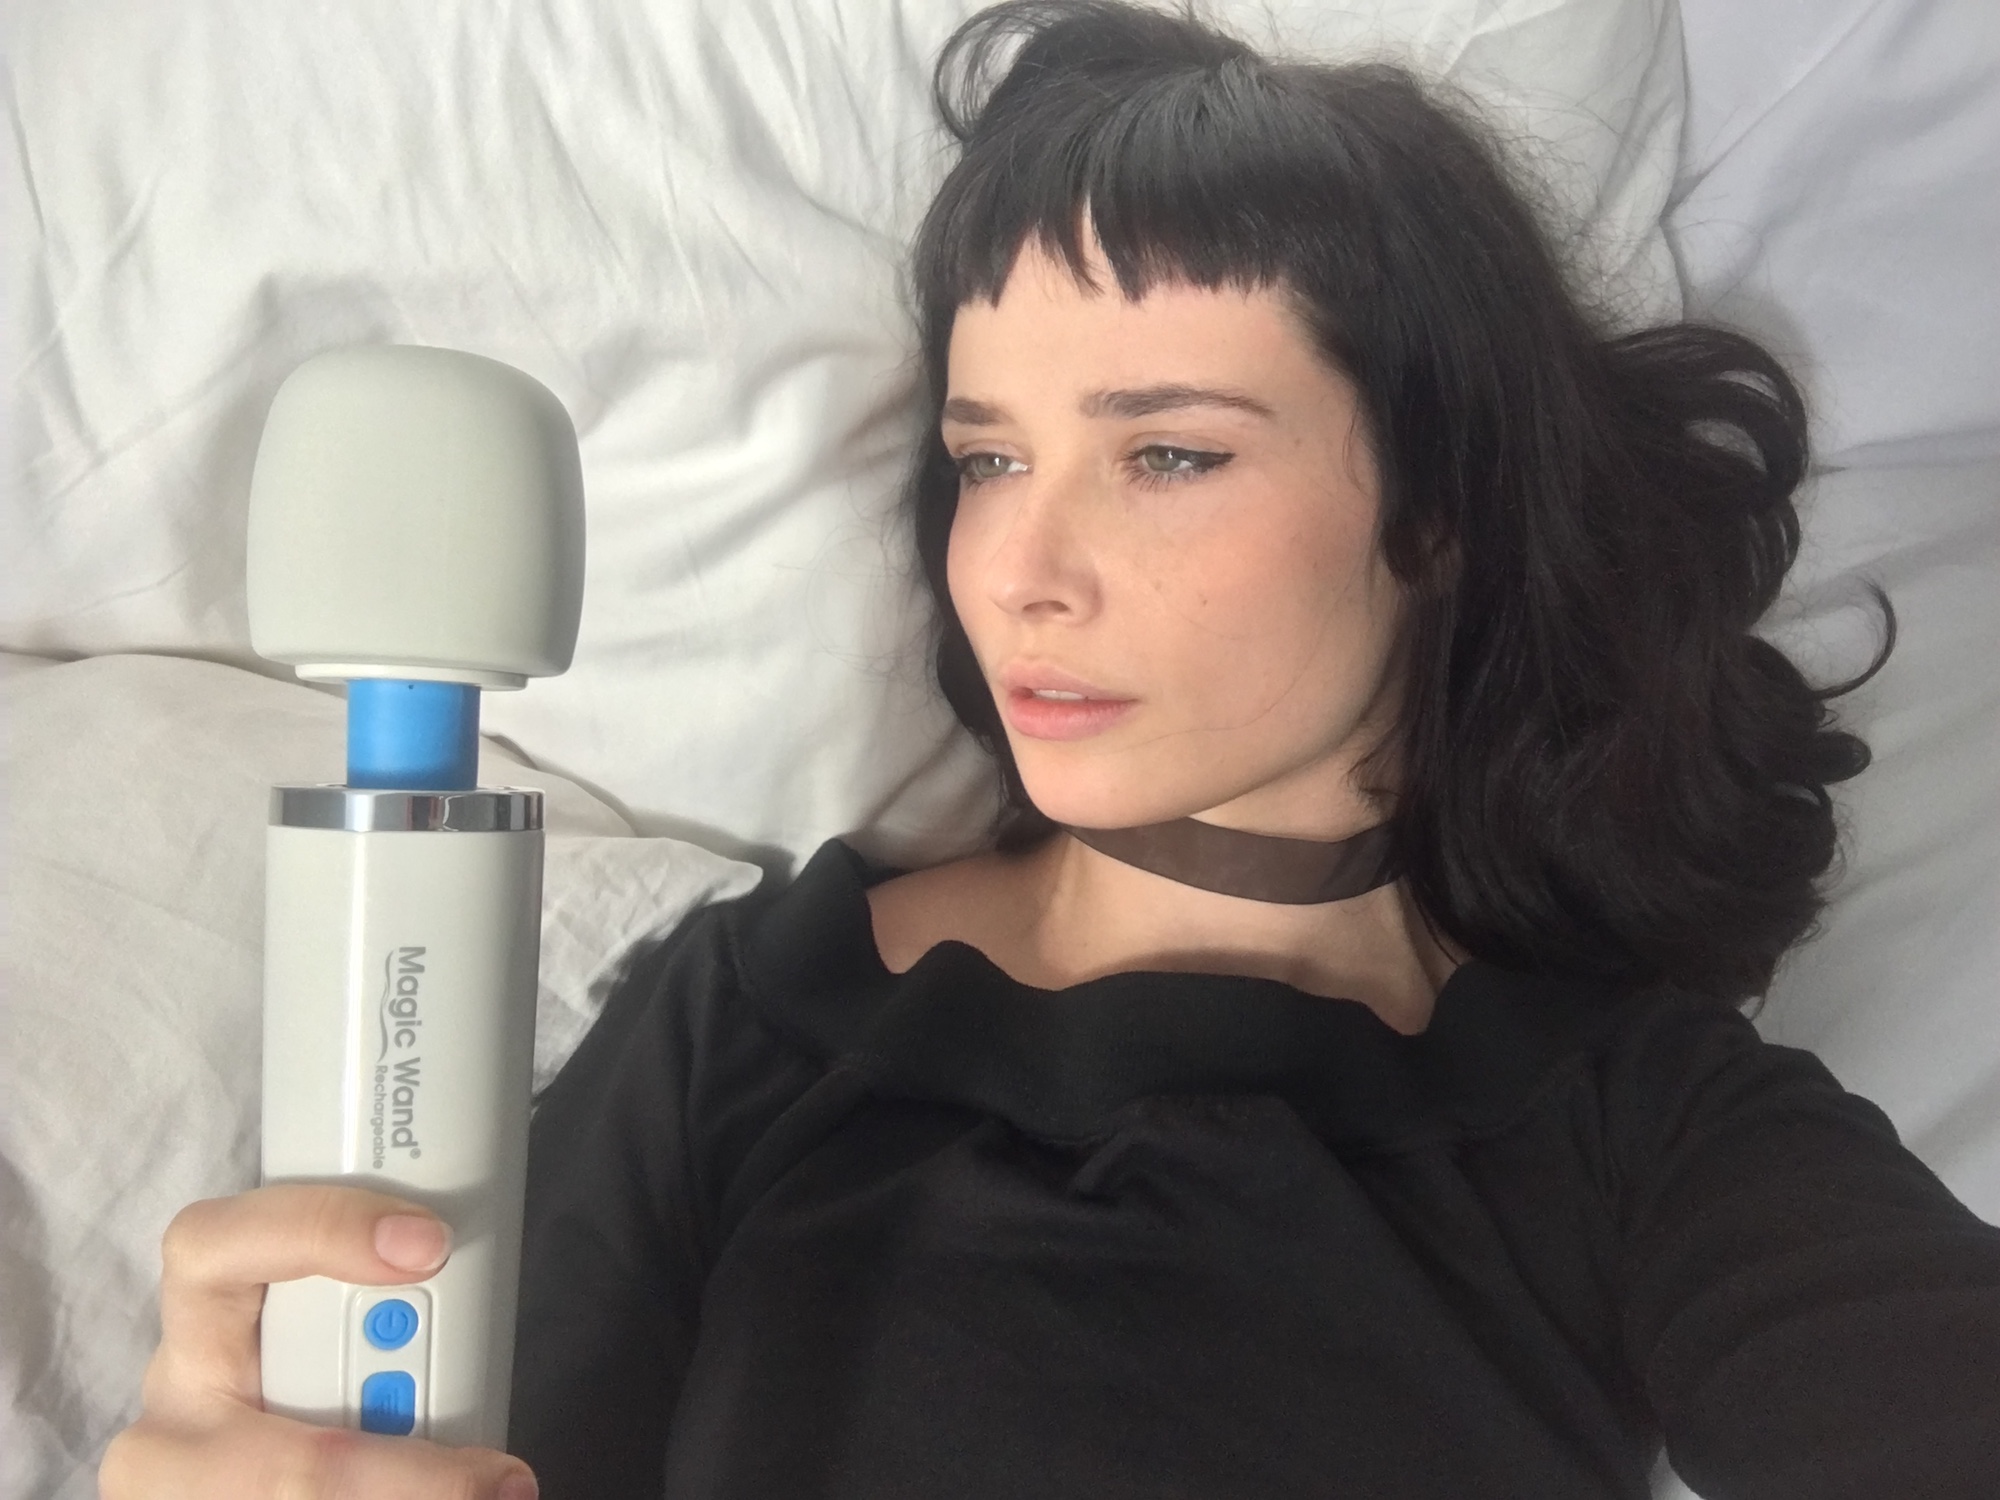 Hitachi Magic Wand Porn - Huge Vibrators May Scare Men, but They're Really, Really ...